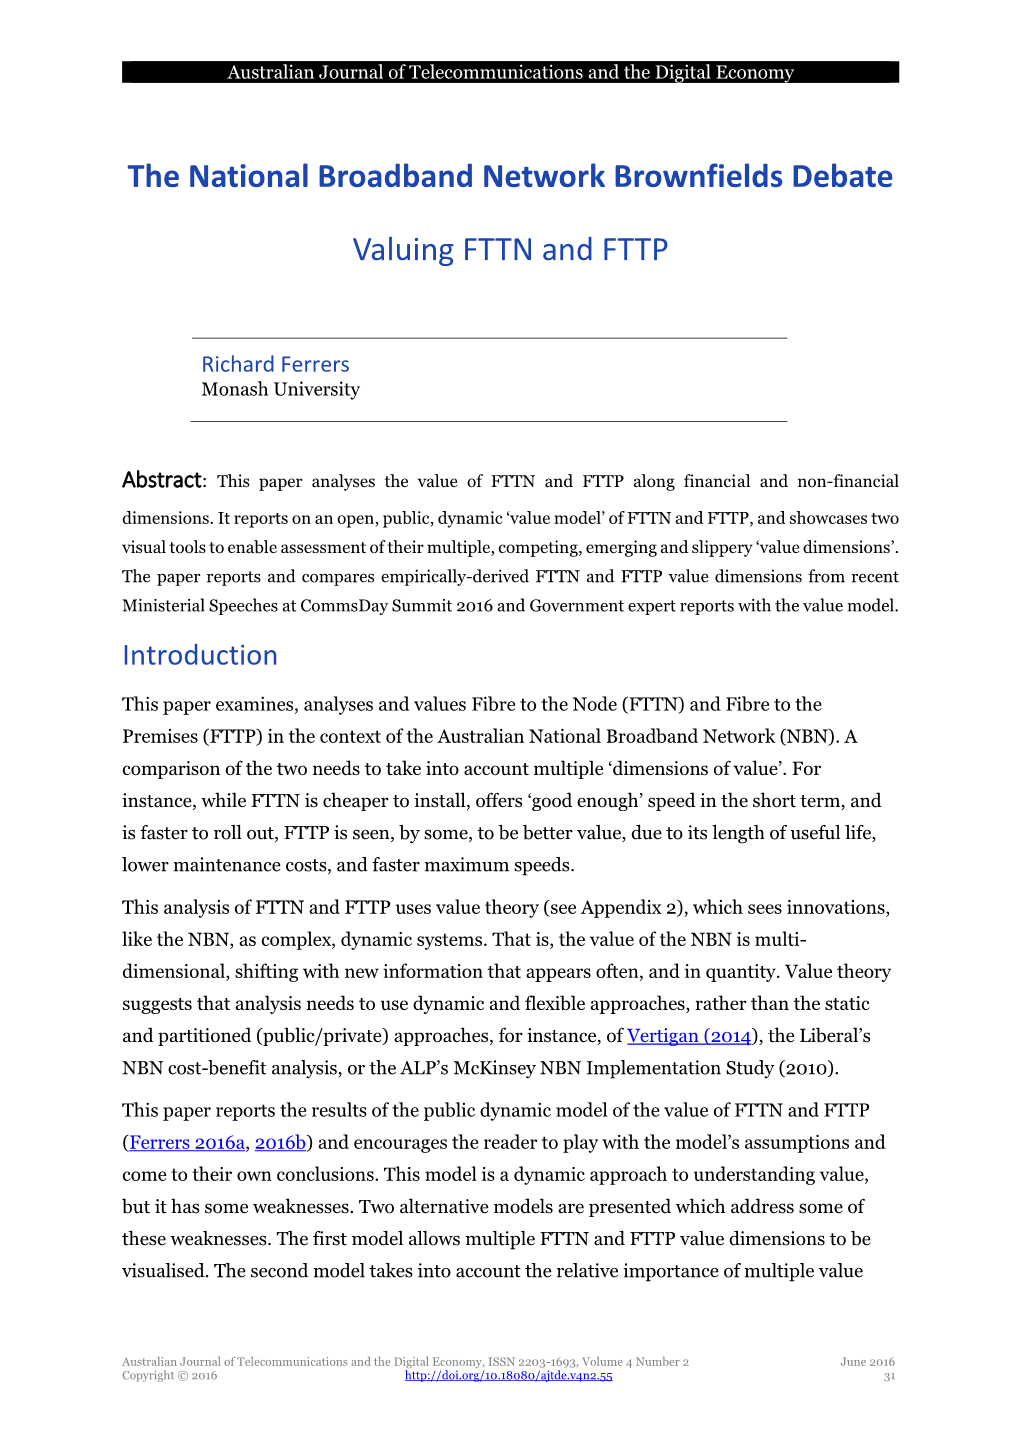 Cheaper, Faster Or Better? Valuing FTTN and FTTP